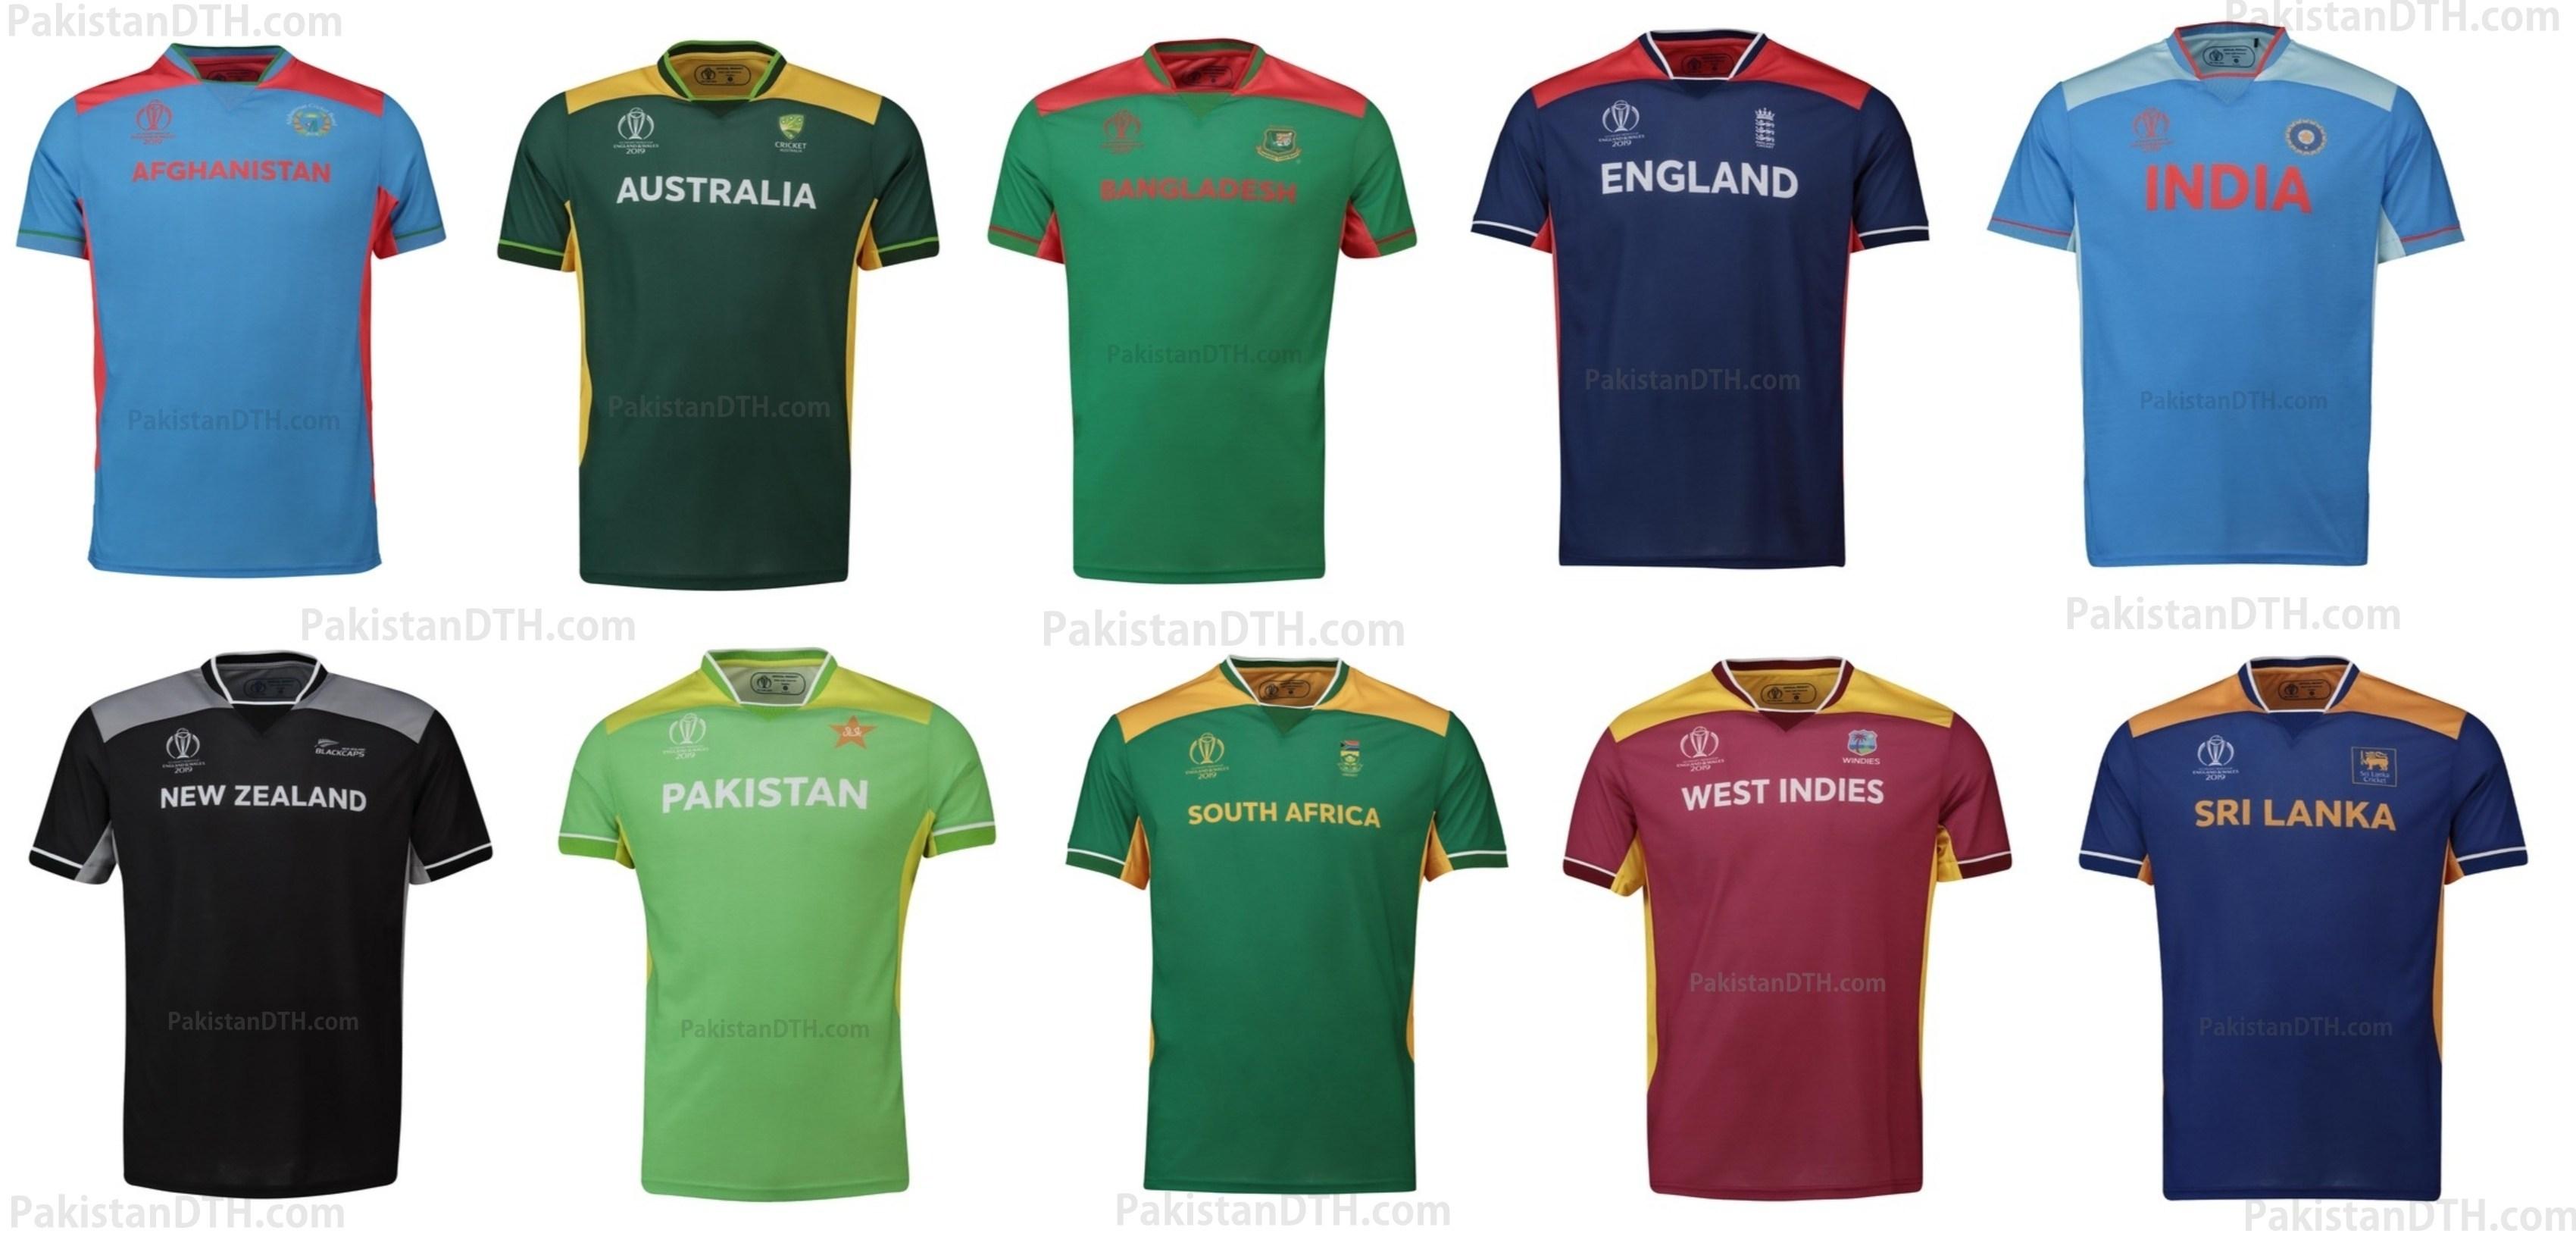 Official Cricket World Cup 2019 Kits are up